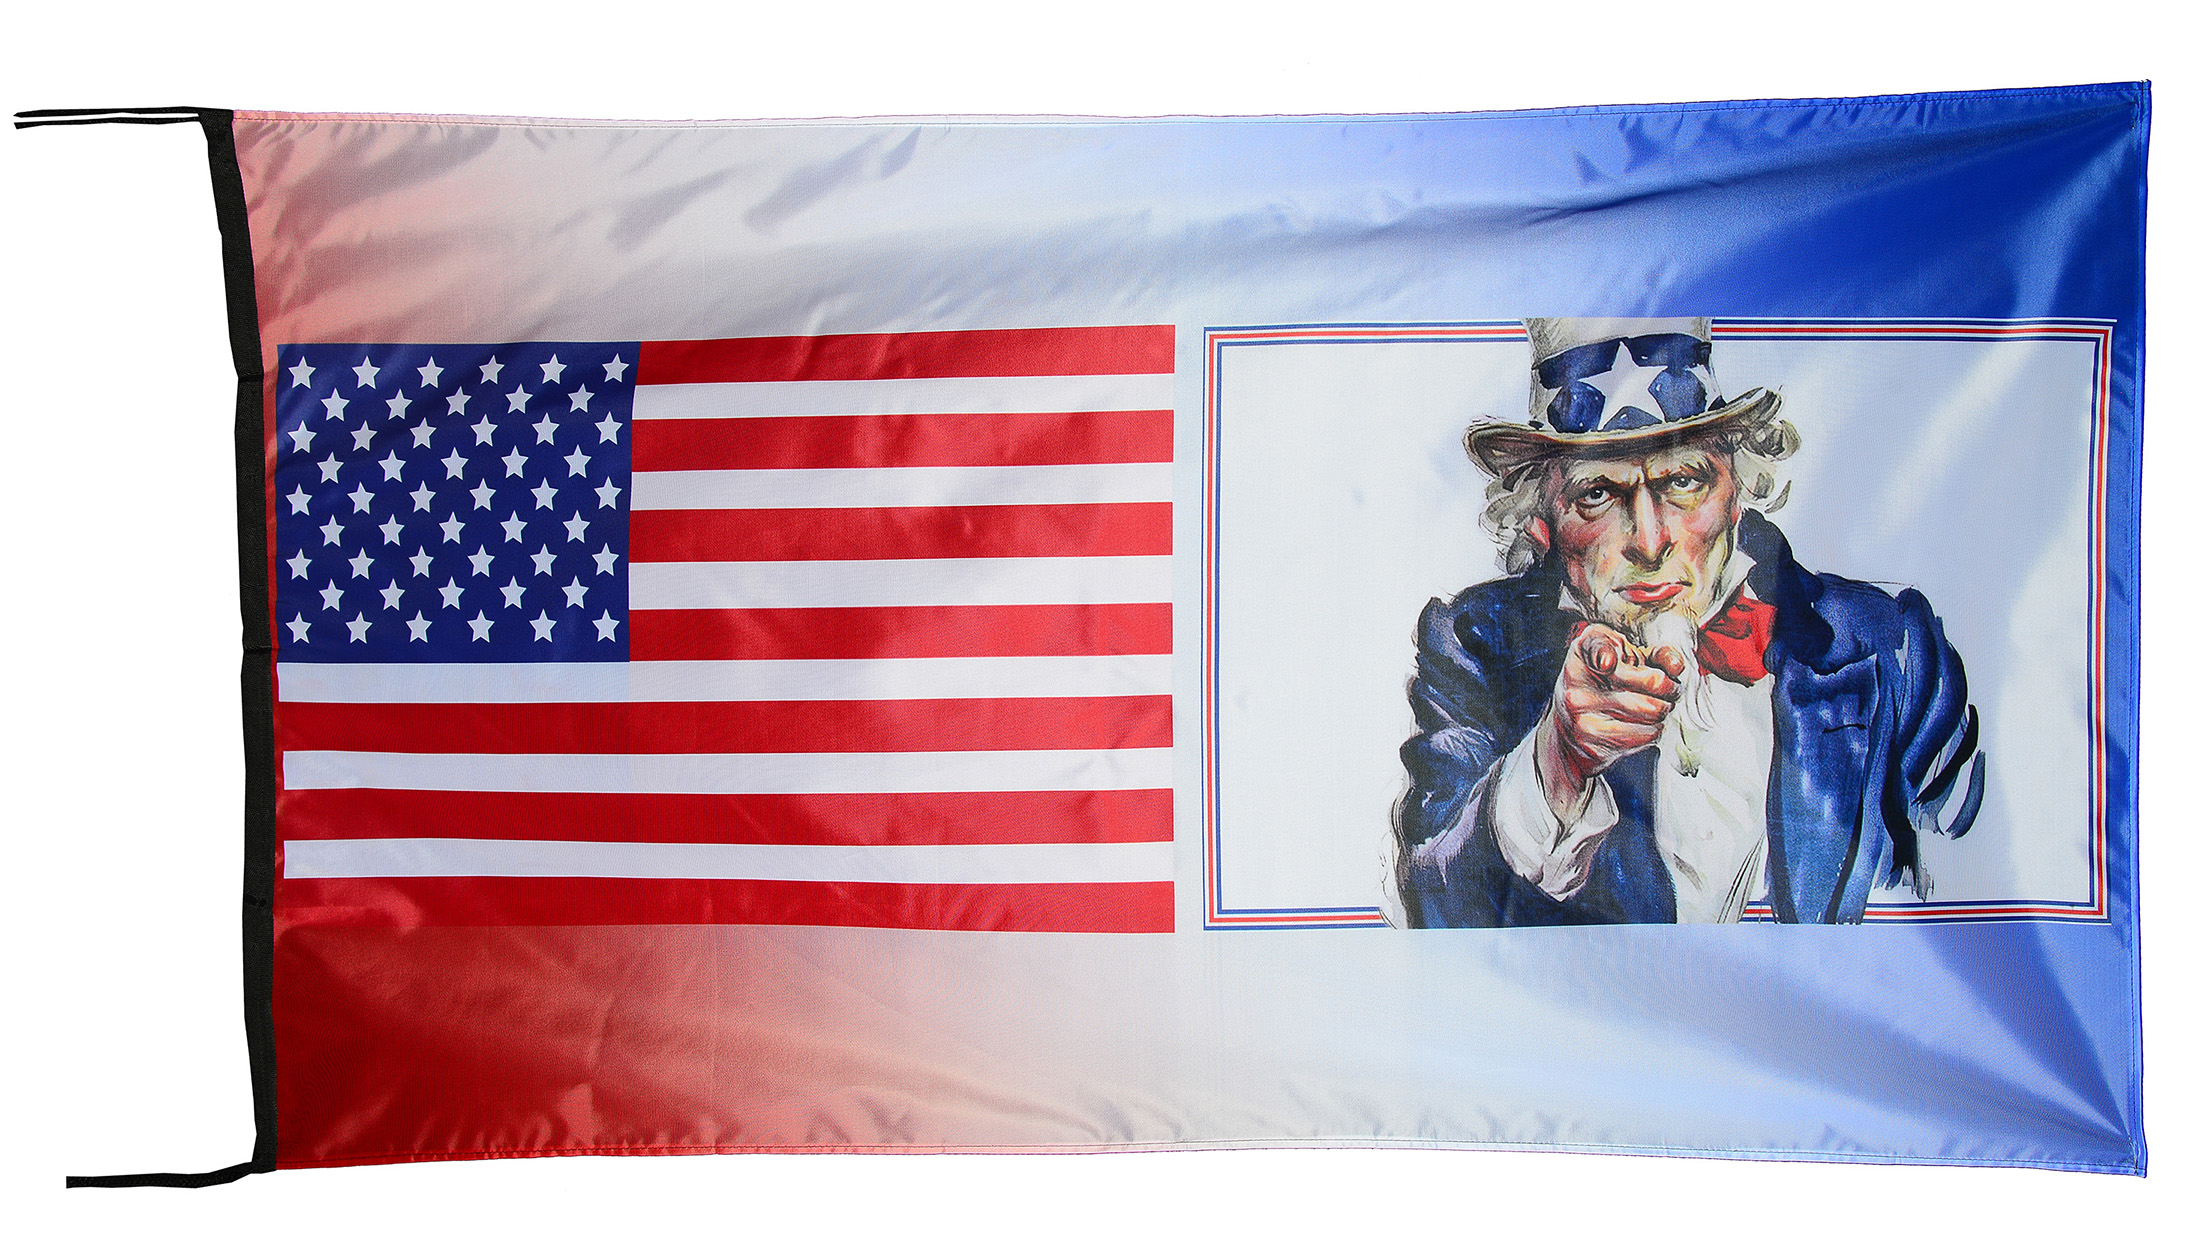 Flag  039 USA / US Country / United States Of America and Happy Xmas Merry Xmas / Christmas / Hollidays / Santa / Winter / Snow / Patriotic / Pride Hybrid Weather-Resistant Polyester Outdoor Flag Landscape Banner / Vivid Colors / 3 X 5 FT (150 x 90cm) International Flags for Sale